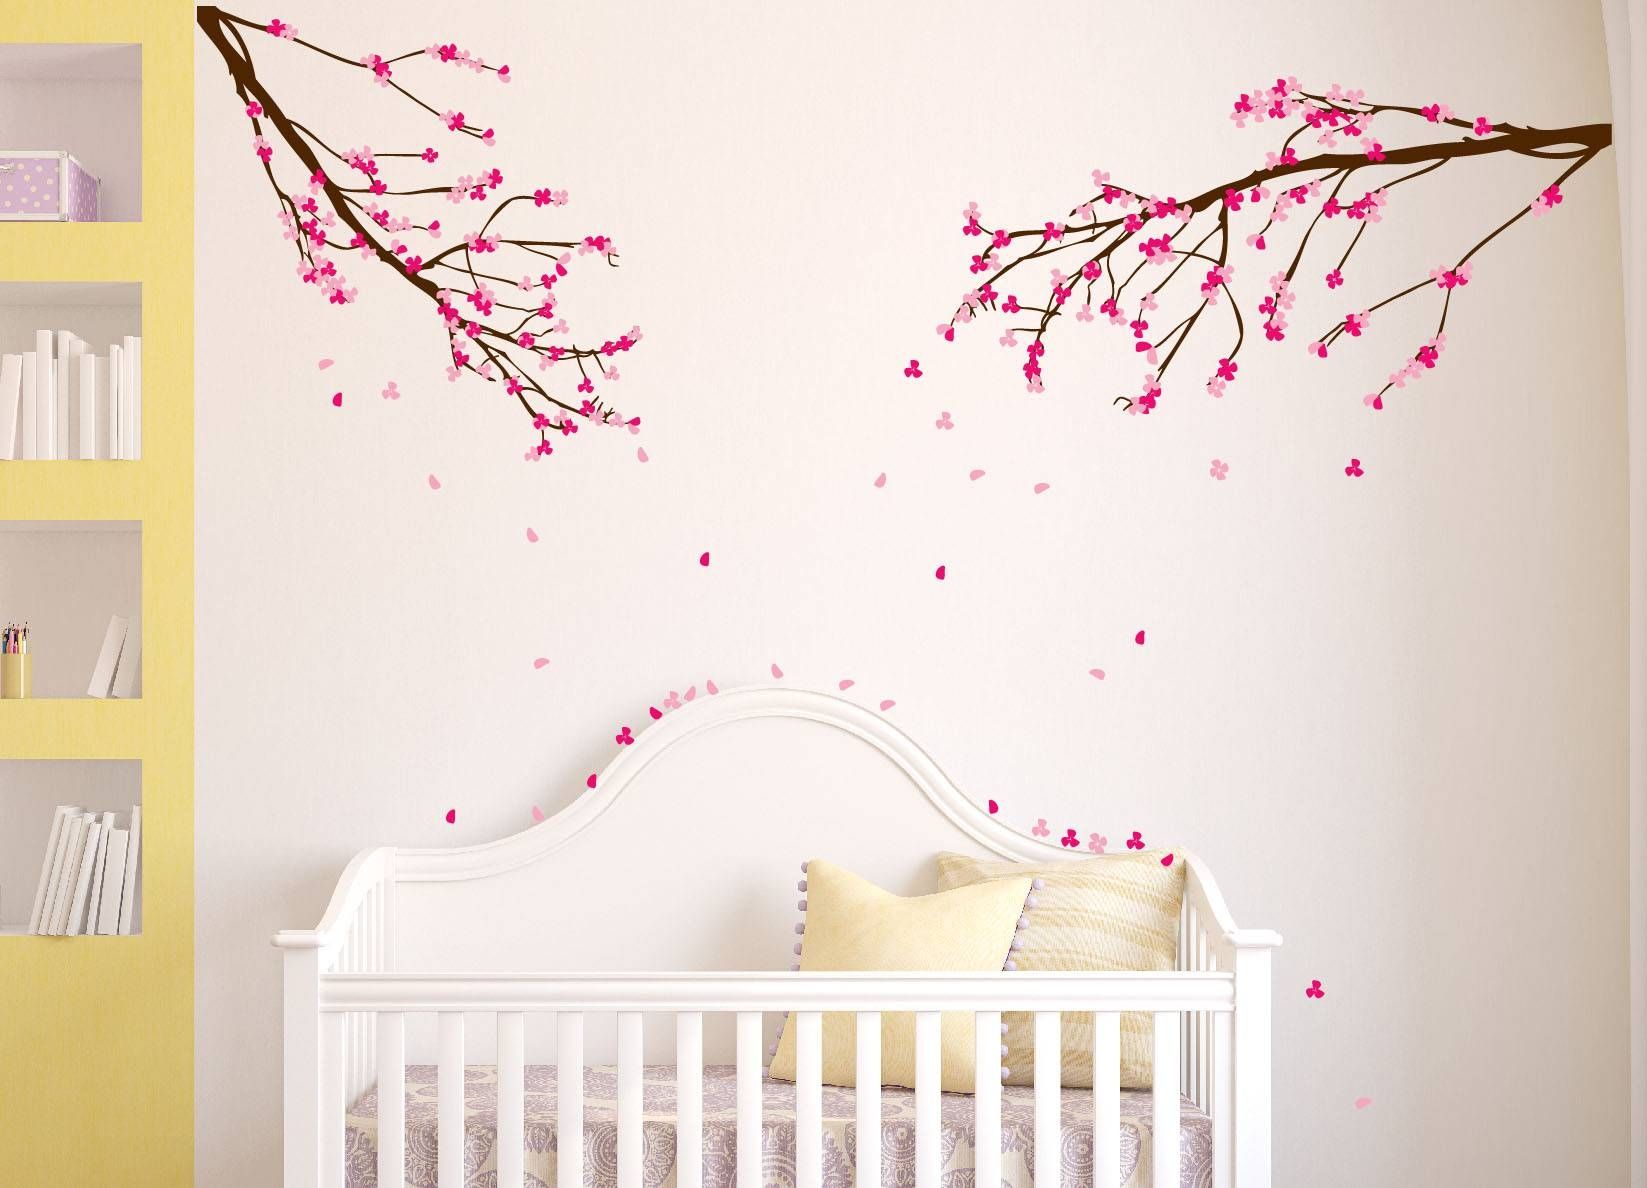 Monkey Bedroom Decor Awesome Wall Decals For Nursery Girl Cherry Within Most Up To Date Baby Nursery 3d Wall Art (View 3 of 20)